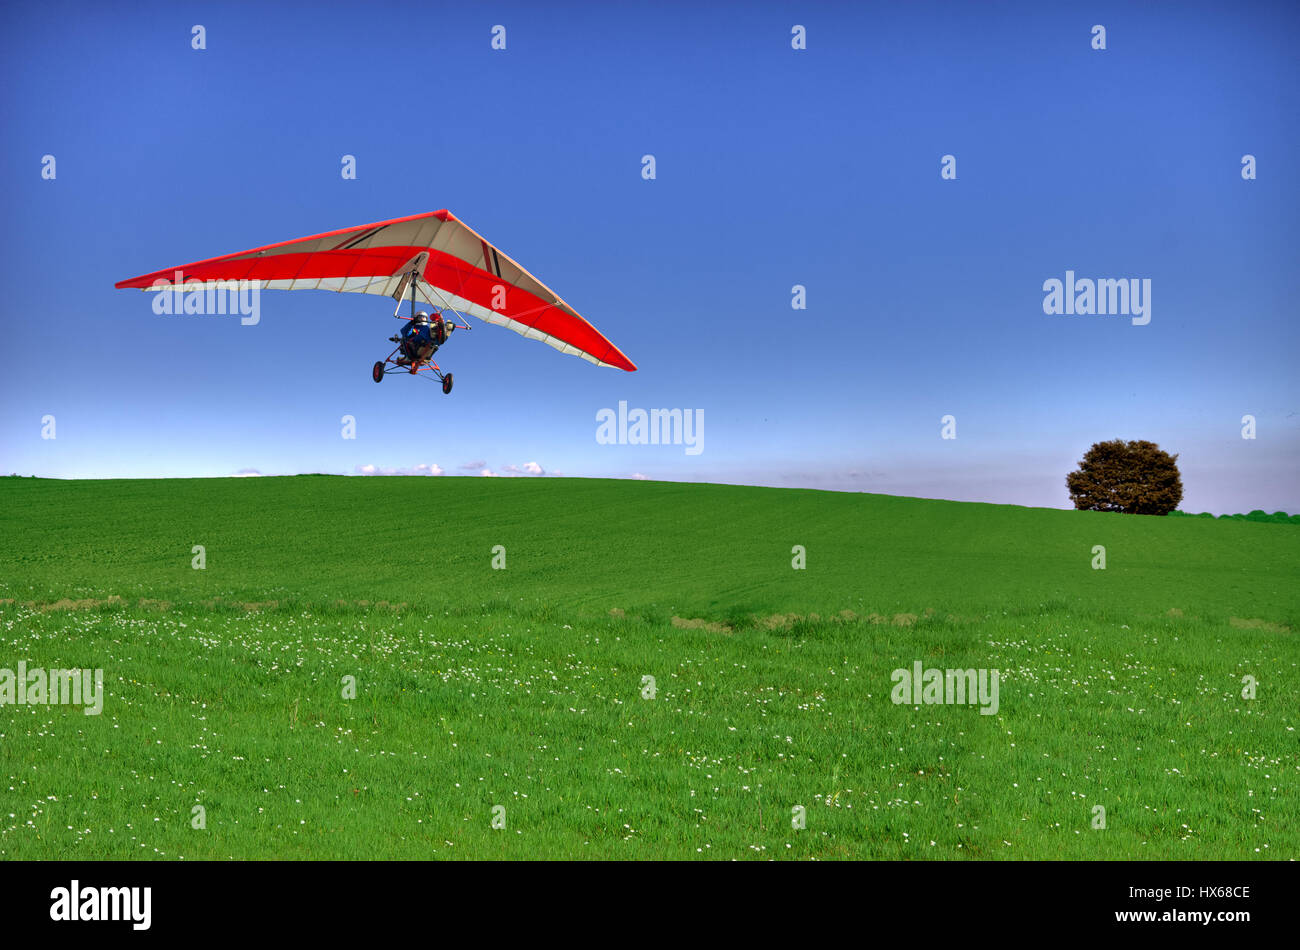 A hang glider flying over a country scene, in a very clear, sunny day Stock Photo